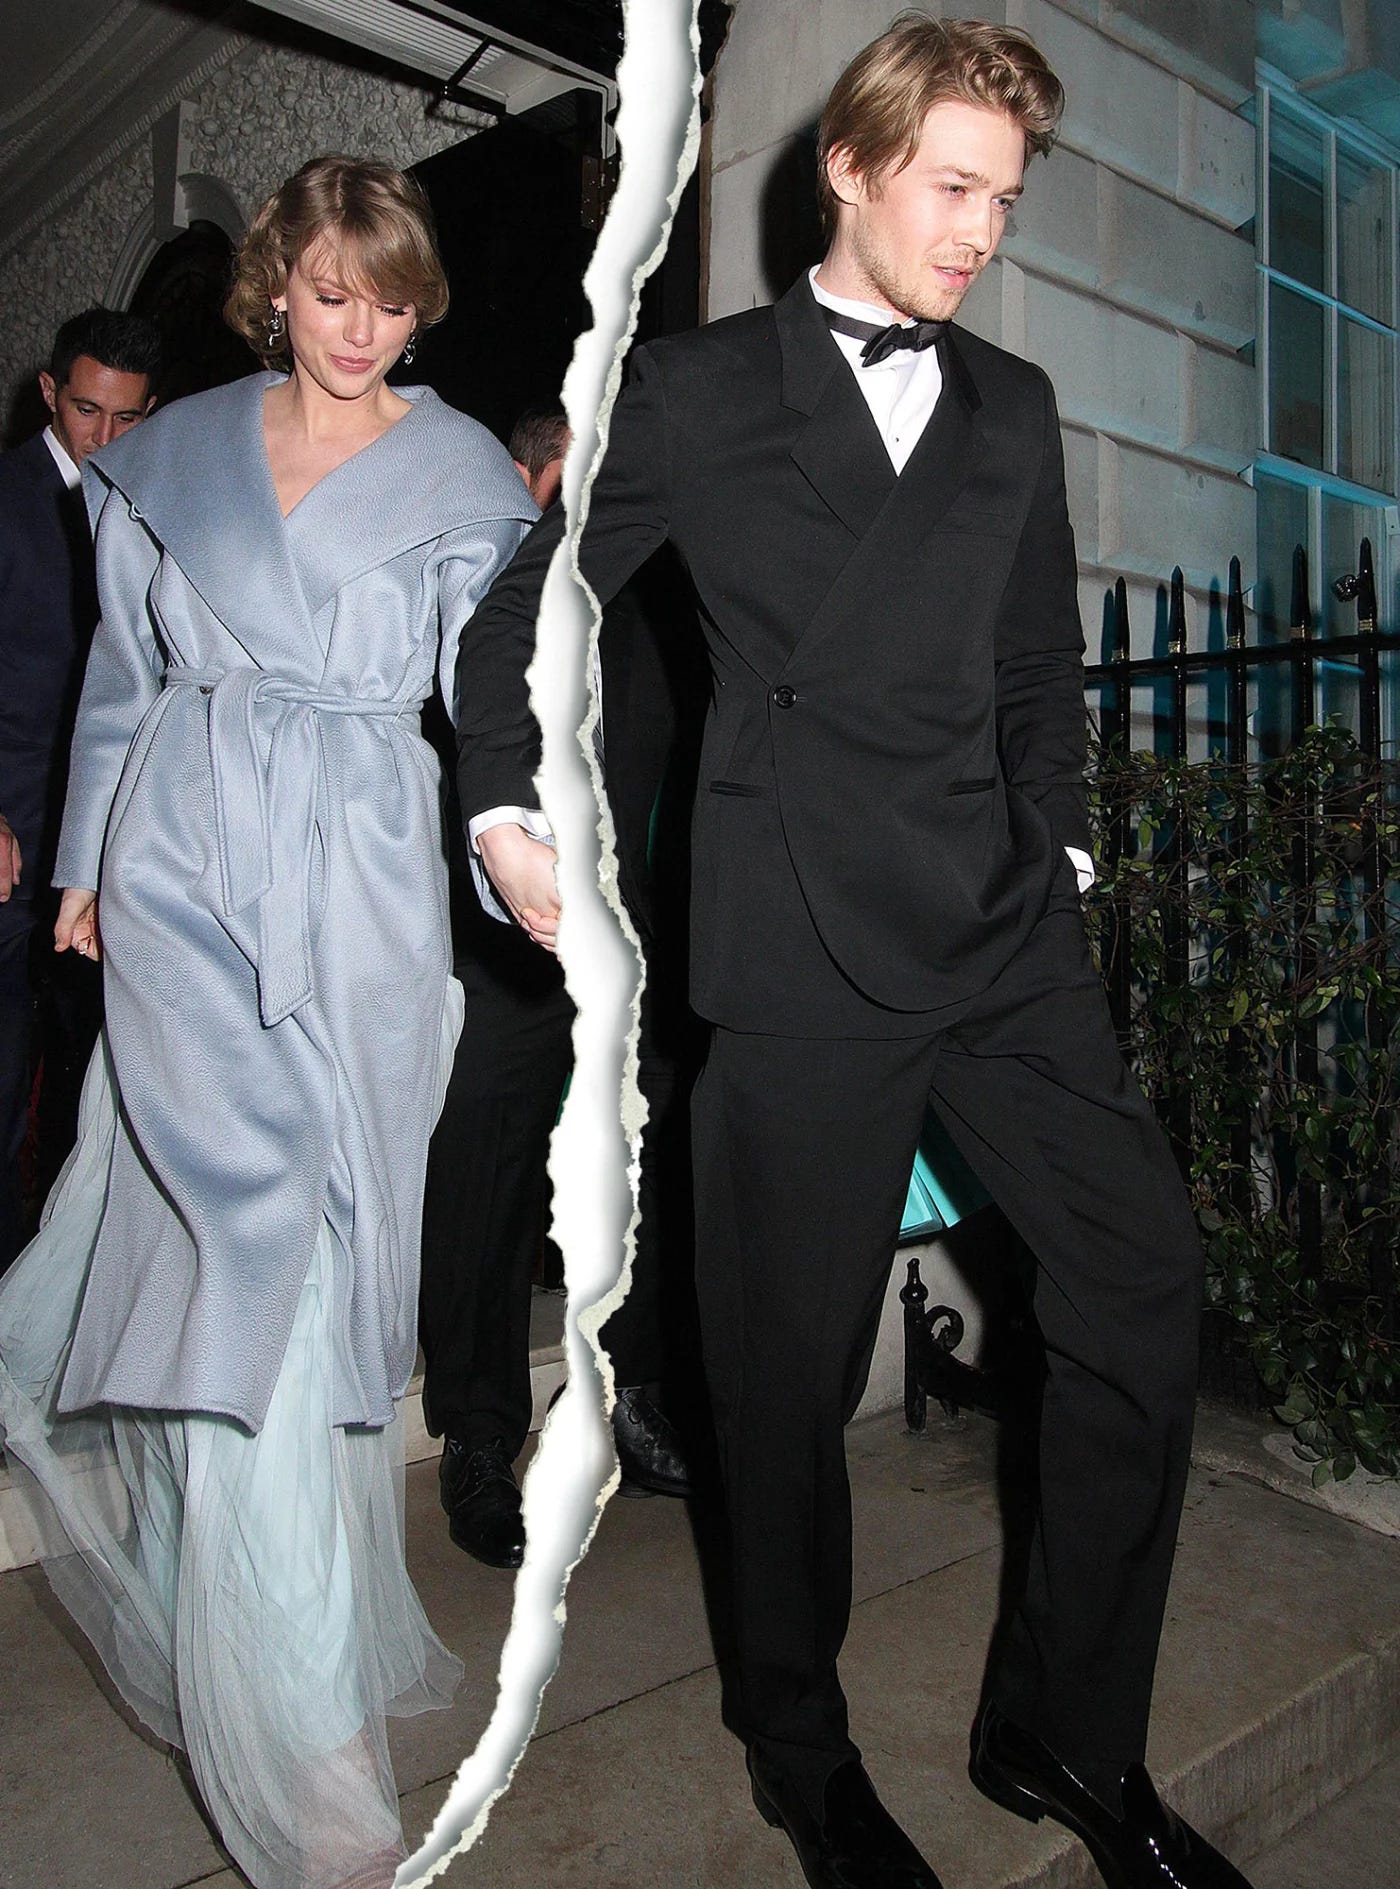 A photo of Taylor Swift and Joe Alwyn fake torn in half by US Weekly.